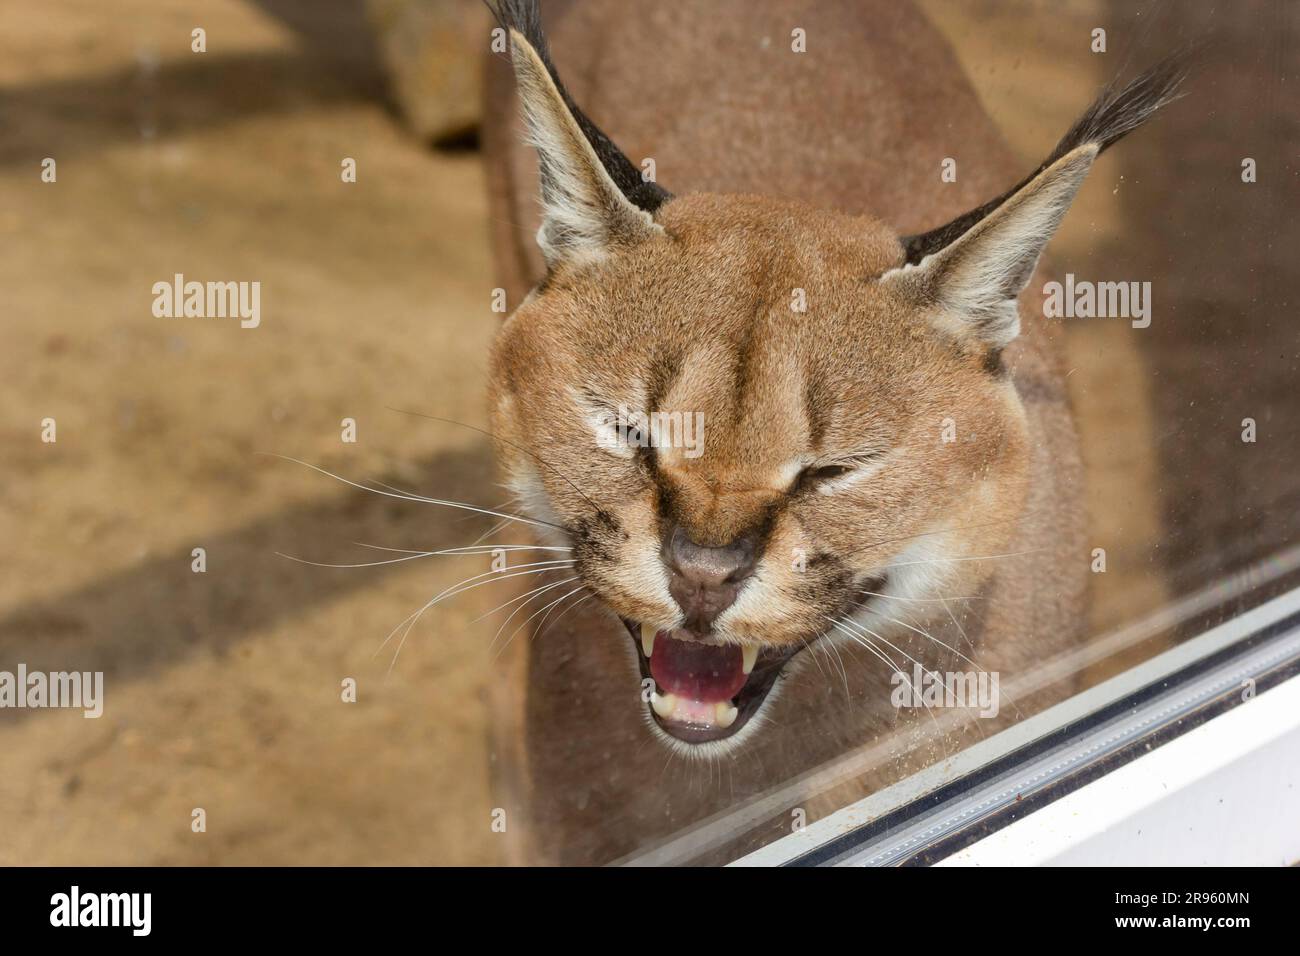 Steppe lynx, caracal in the zoo. Muzzle of a hissing and growling caracal Stock Photo